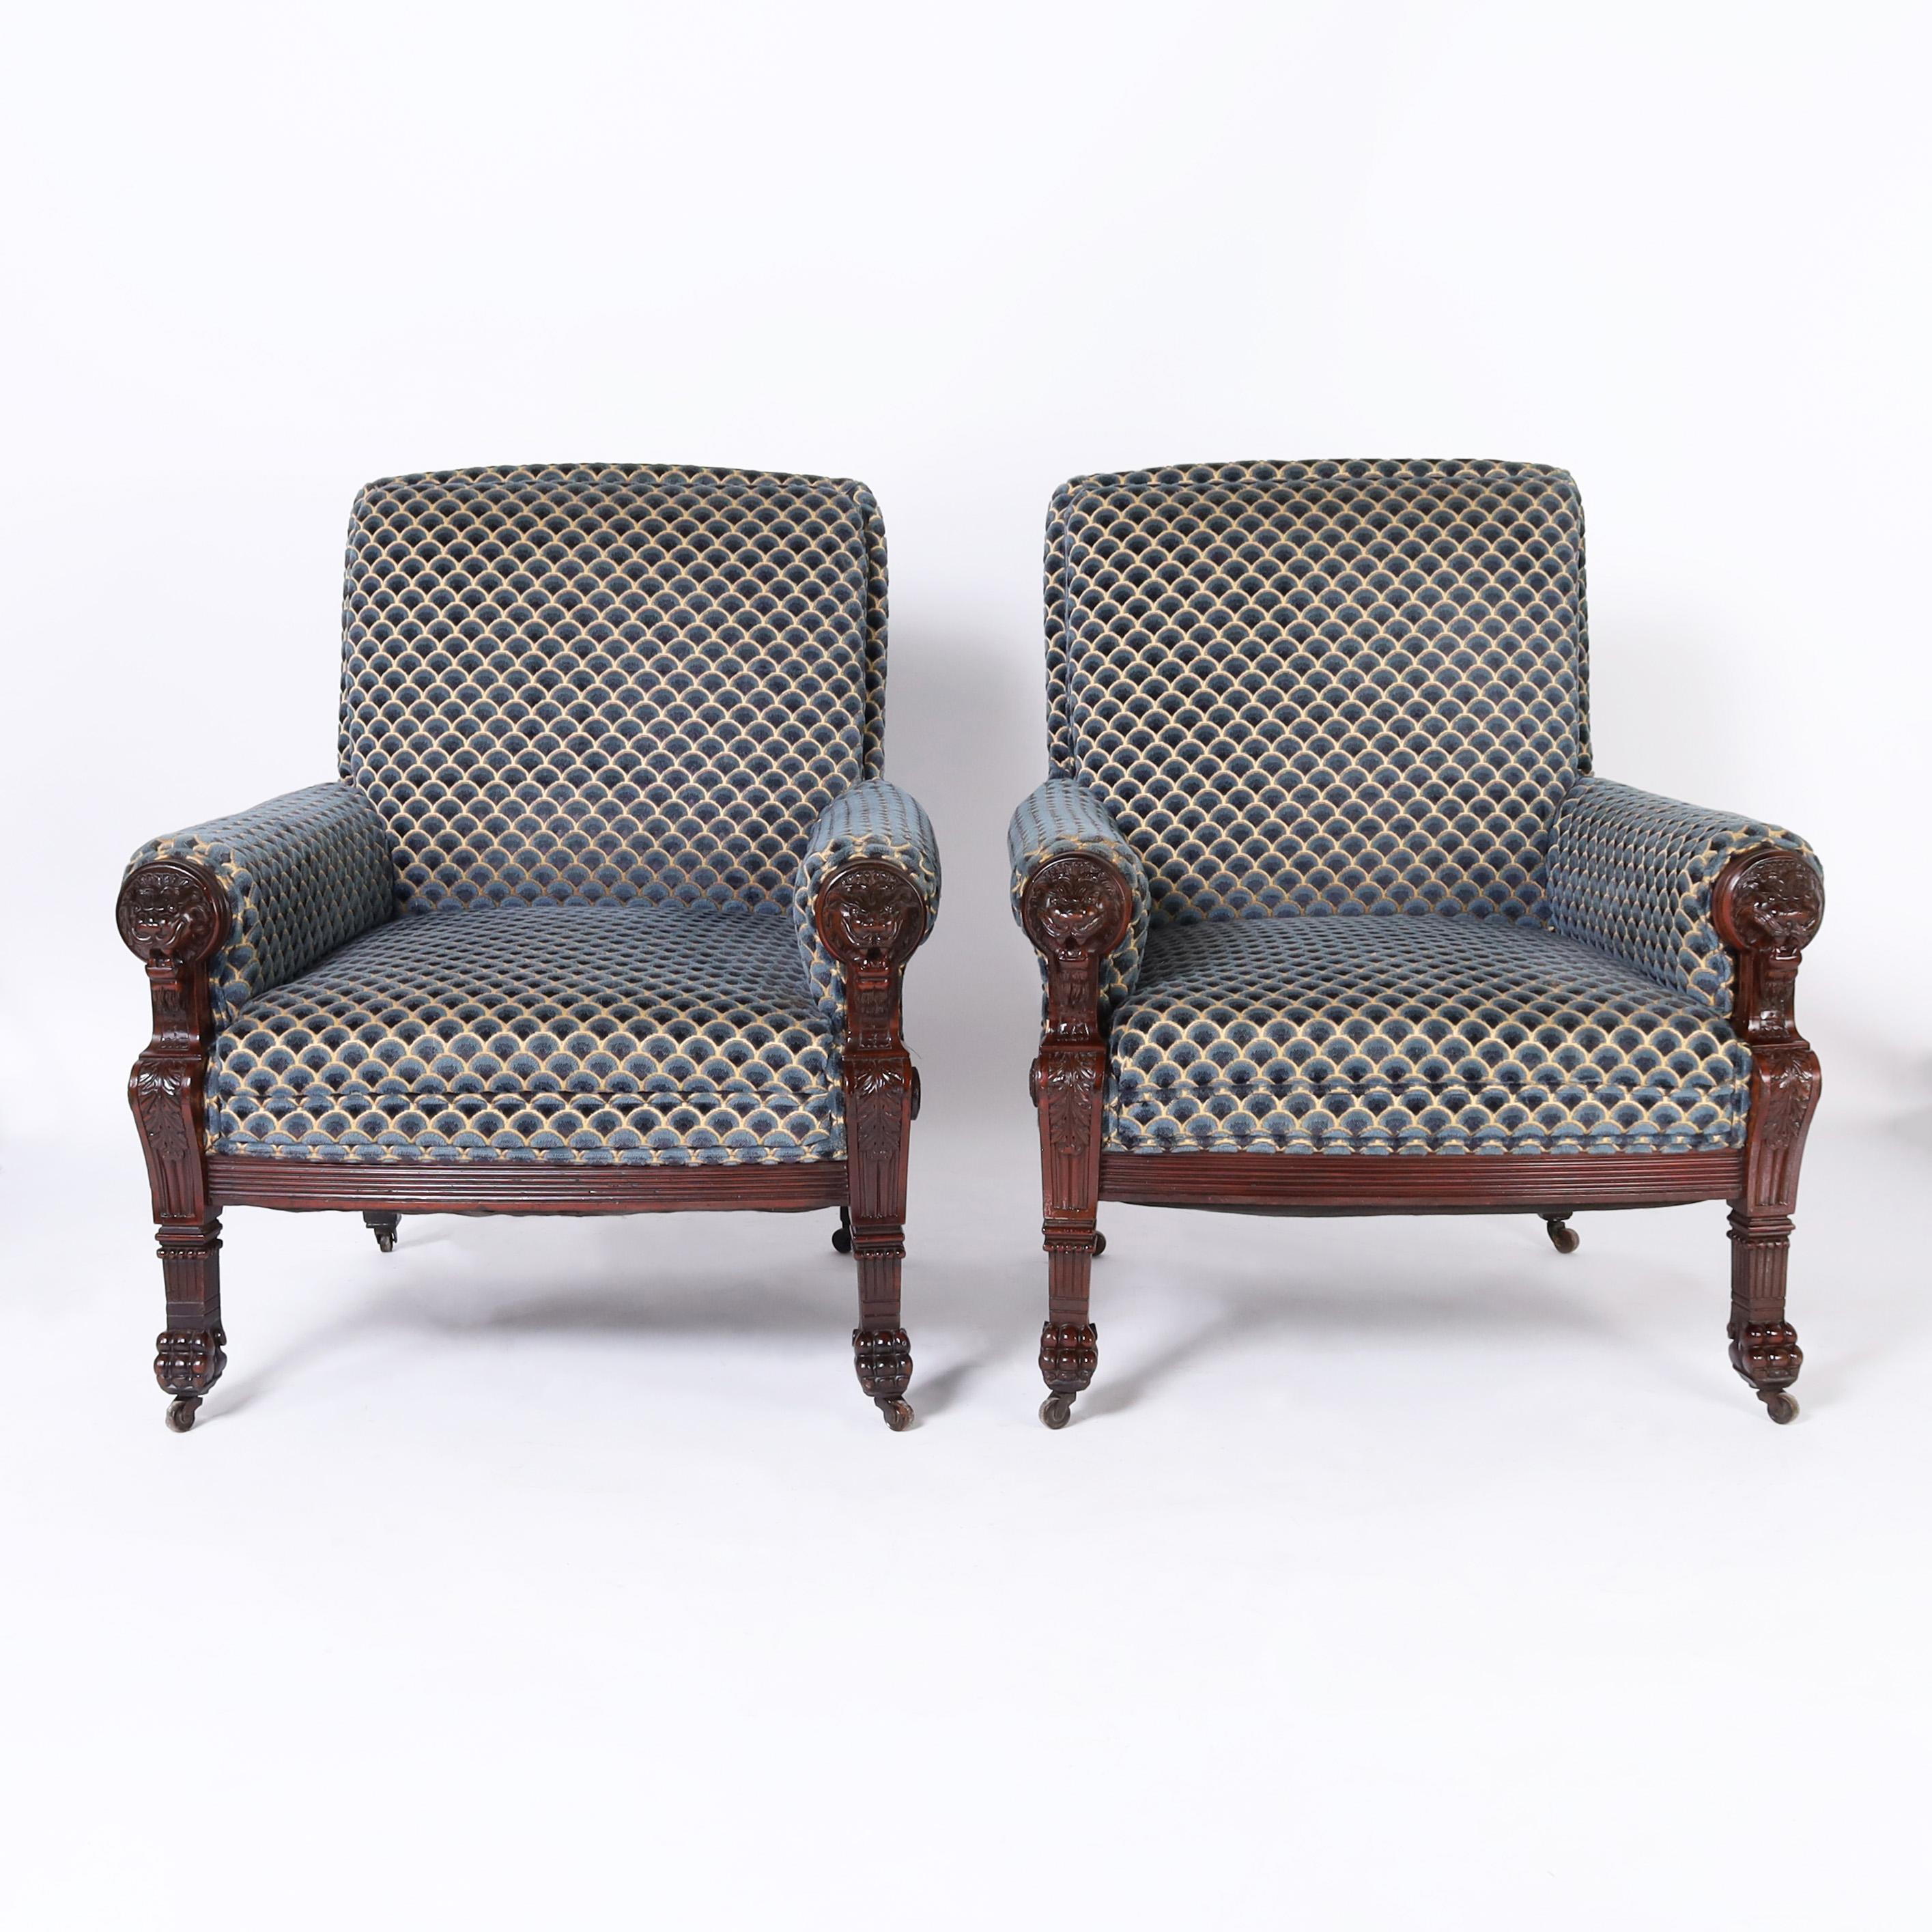 Impressive pair of 19th century English Victorian armchairs built for comfort and crafted in mahogany with carved lion heads acanthus leaves and paw feet on casters.